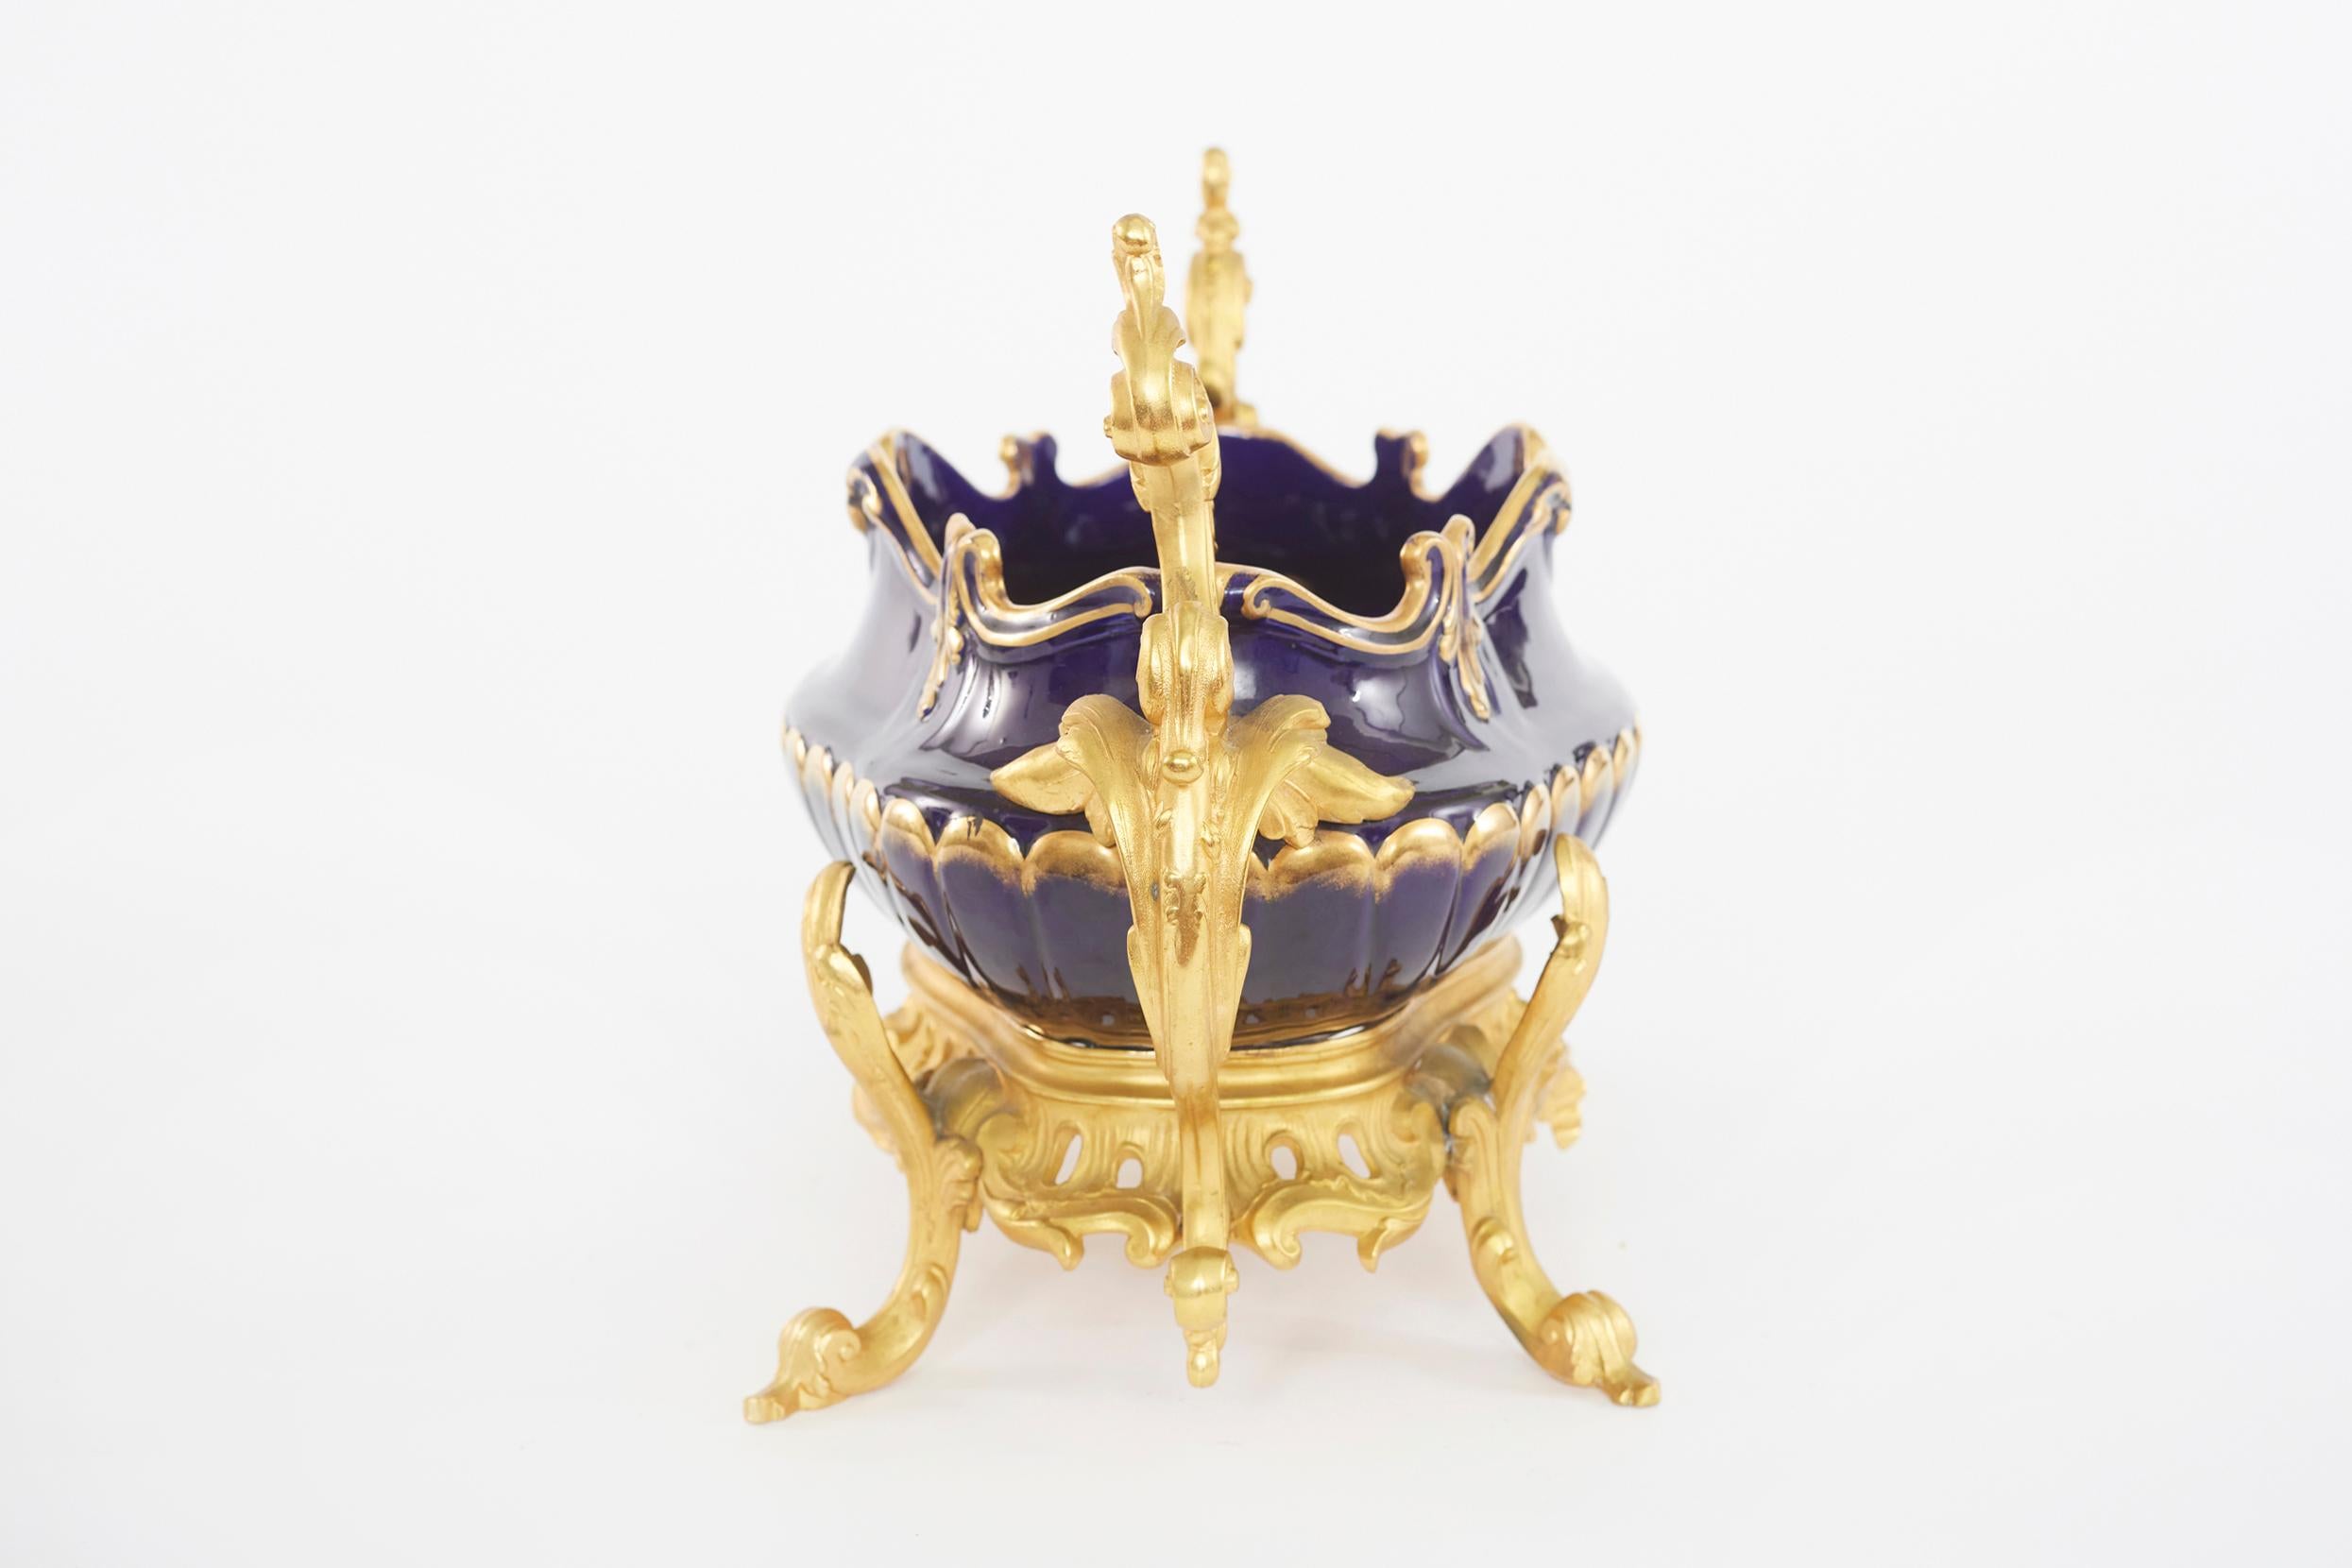 19th Century hand painted gilt gold design porcelain with footed bronze mounted decorative centerpiece with side handles. The centerpiece is in great condition. Minor wear consistent with age / use. The piece stands about 18 inches long X 11 inches